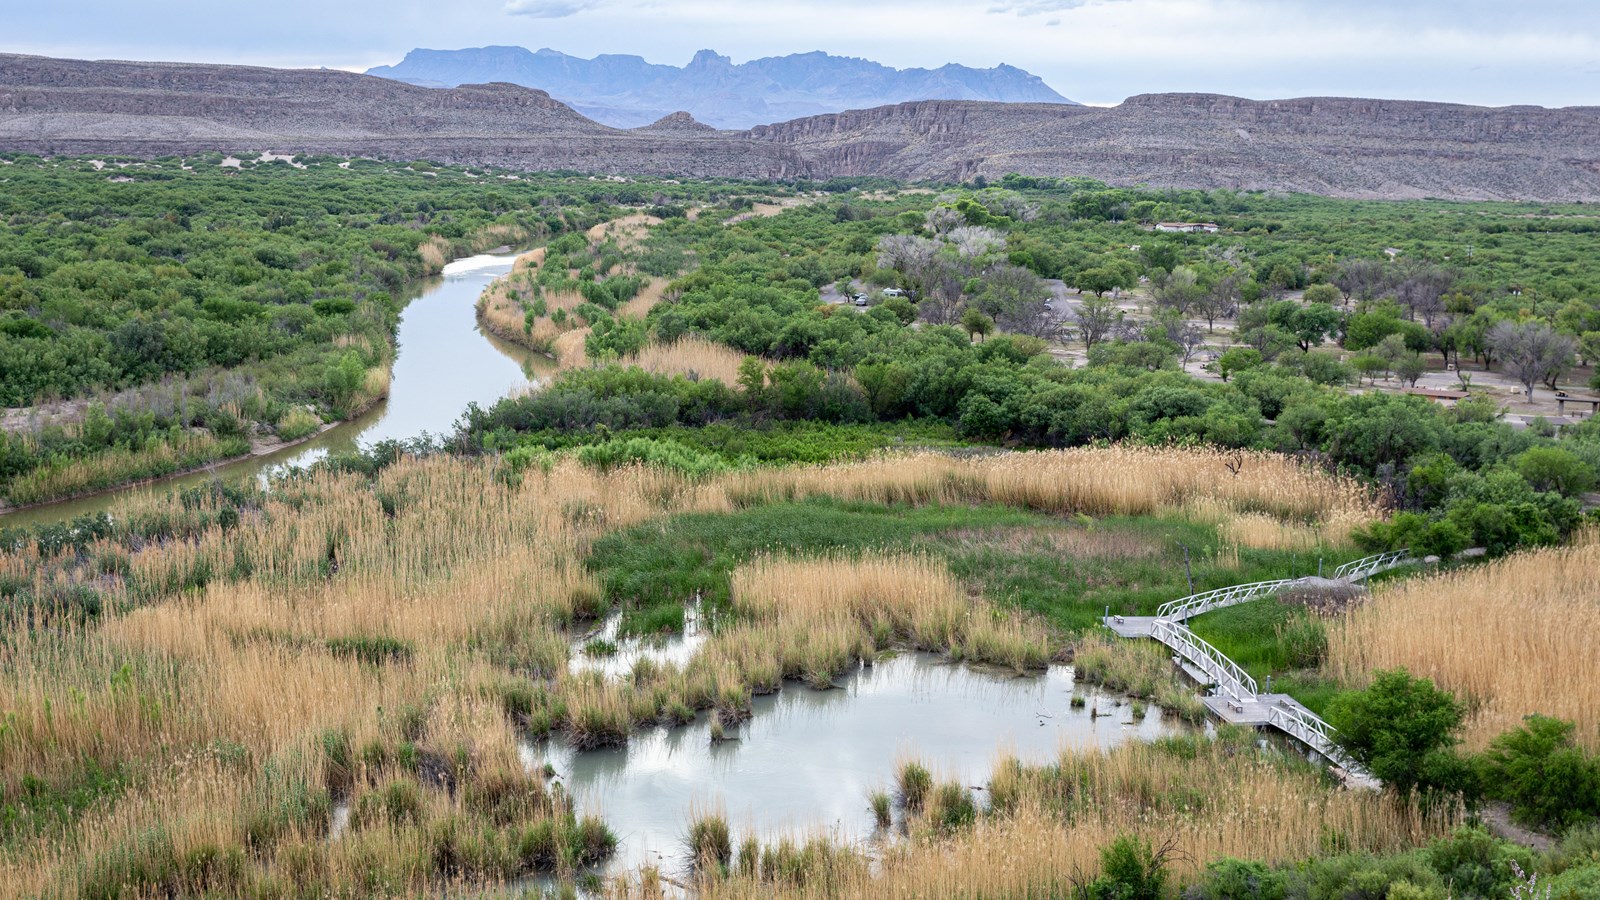 A view from a high point looks out over the Rio Grande, the wetland, and the Chisos Mountains.